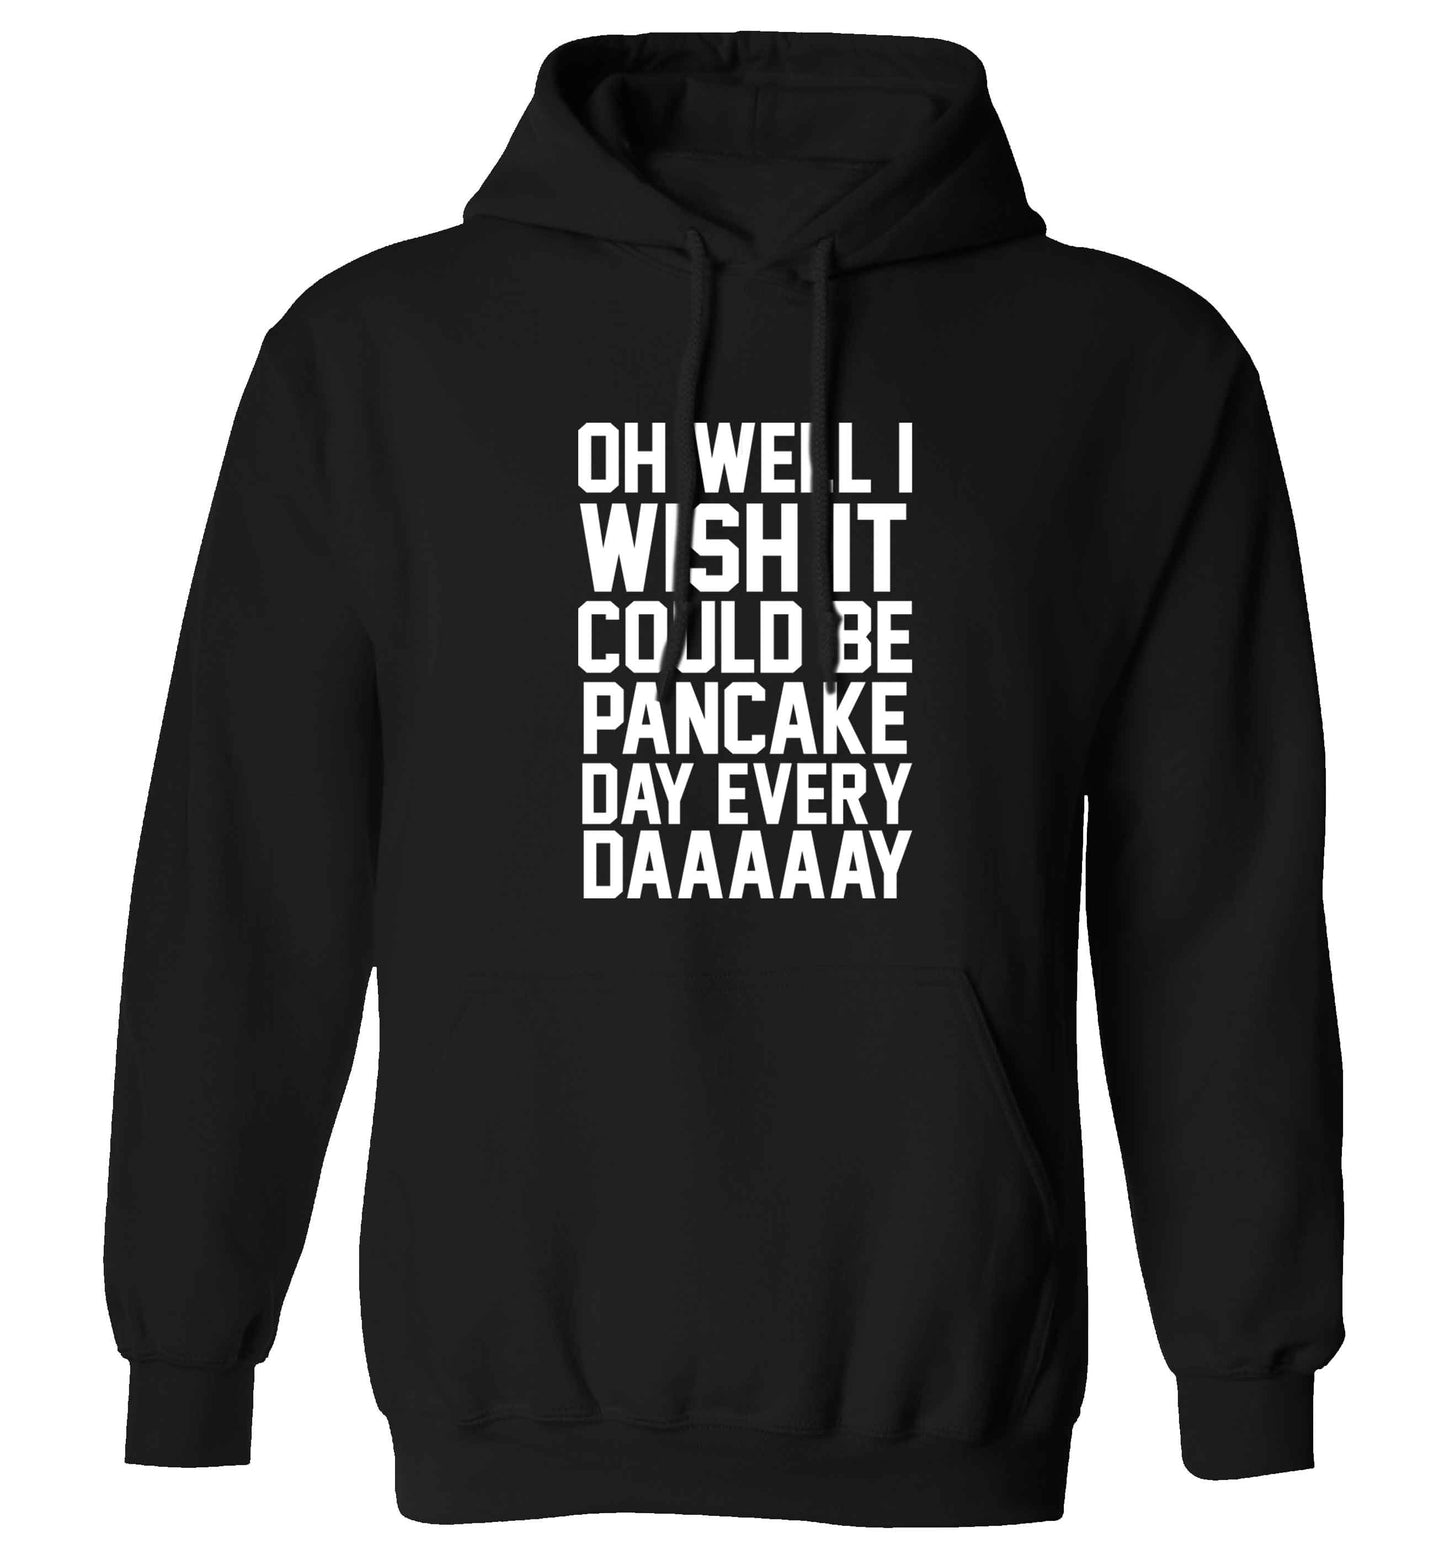 Oh well I wish it could be pancake day every day adults unisex black hoodie 2XL